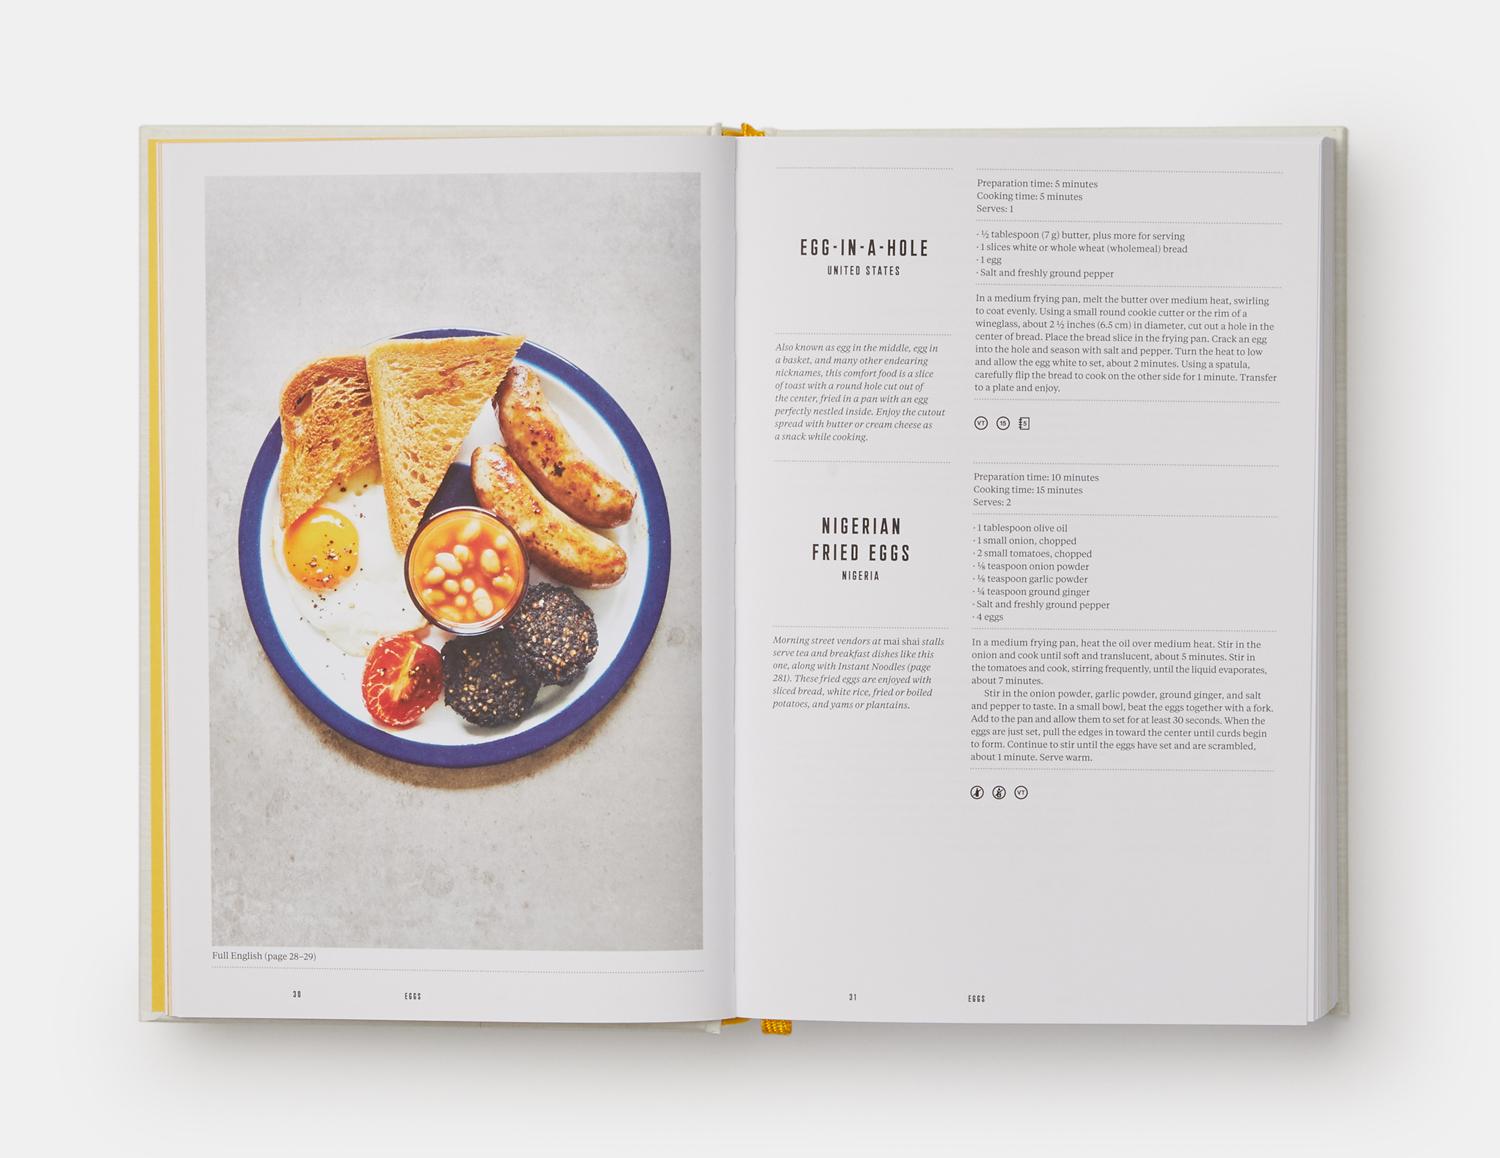 Start the day with the definitive cookbook of authentic home-cooking breakfast dishes from around the world 

Breakfast is the most important, and comforting, time of day for billions of people everywhere. Here, for the first time, a collection of